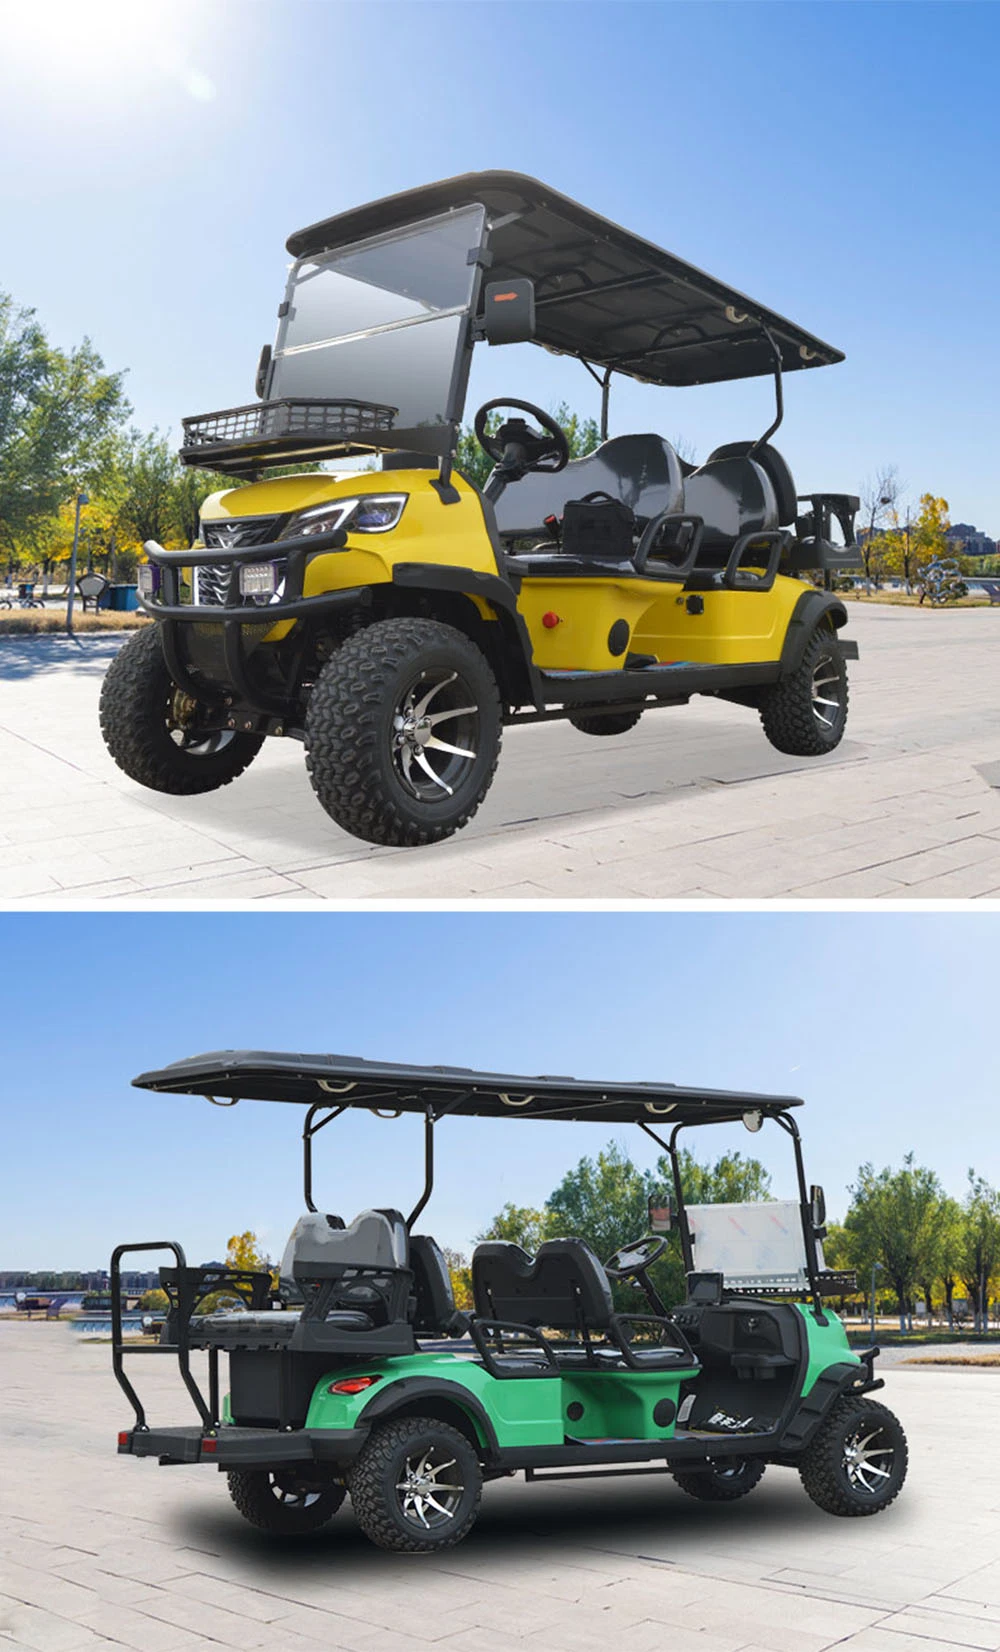 Electric Golf Cart 4seated Golf Buggy Sightseeing Bus off-Road 72vgolf Cart